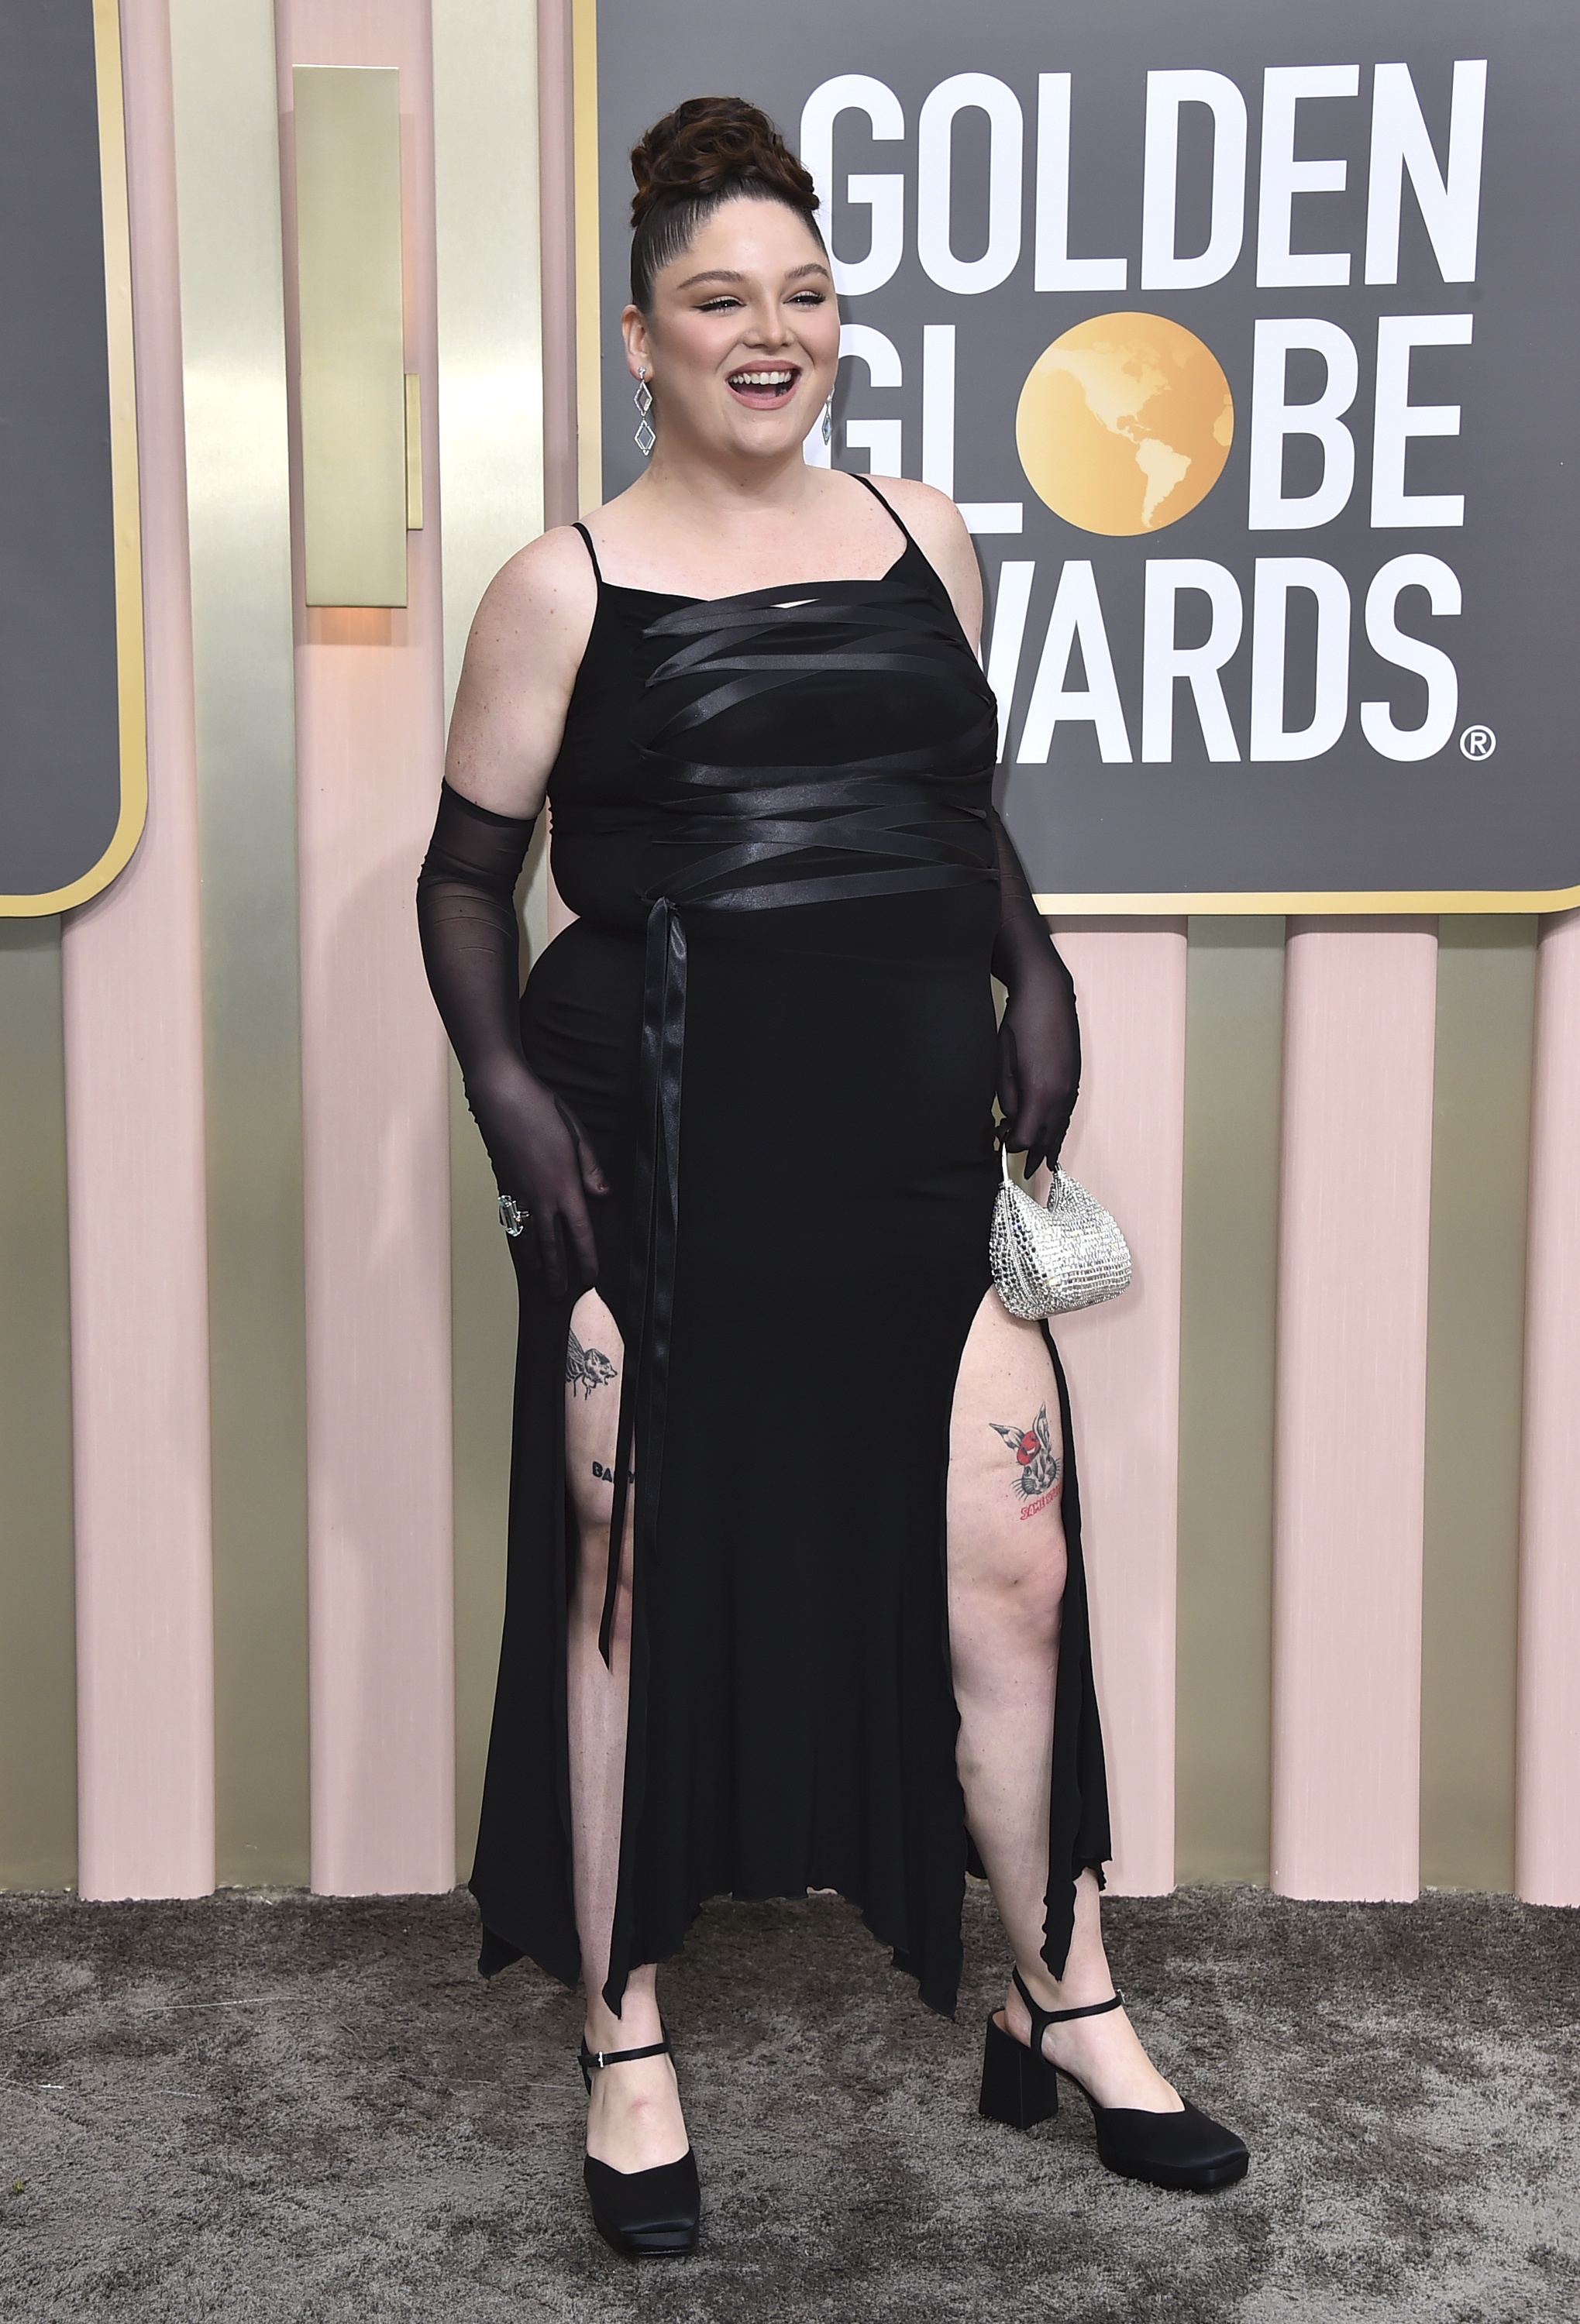 Megan Stalter arrives at the 80th annual Golden Globe Awards at the Beverly Hilton Hotel on Tuesday, Jan. 10, 2023, in Beverly Hills, Calif. (Photo by Jordan Strauss/Invision/AP)